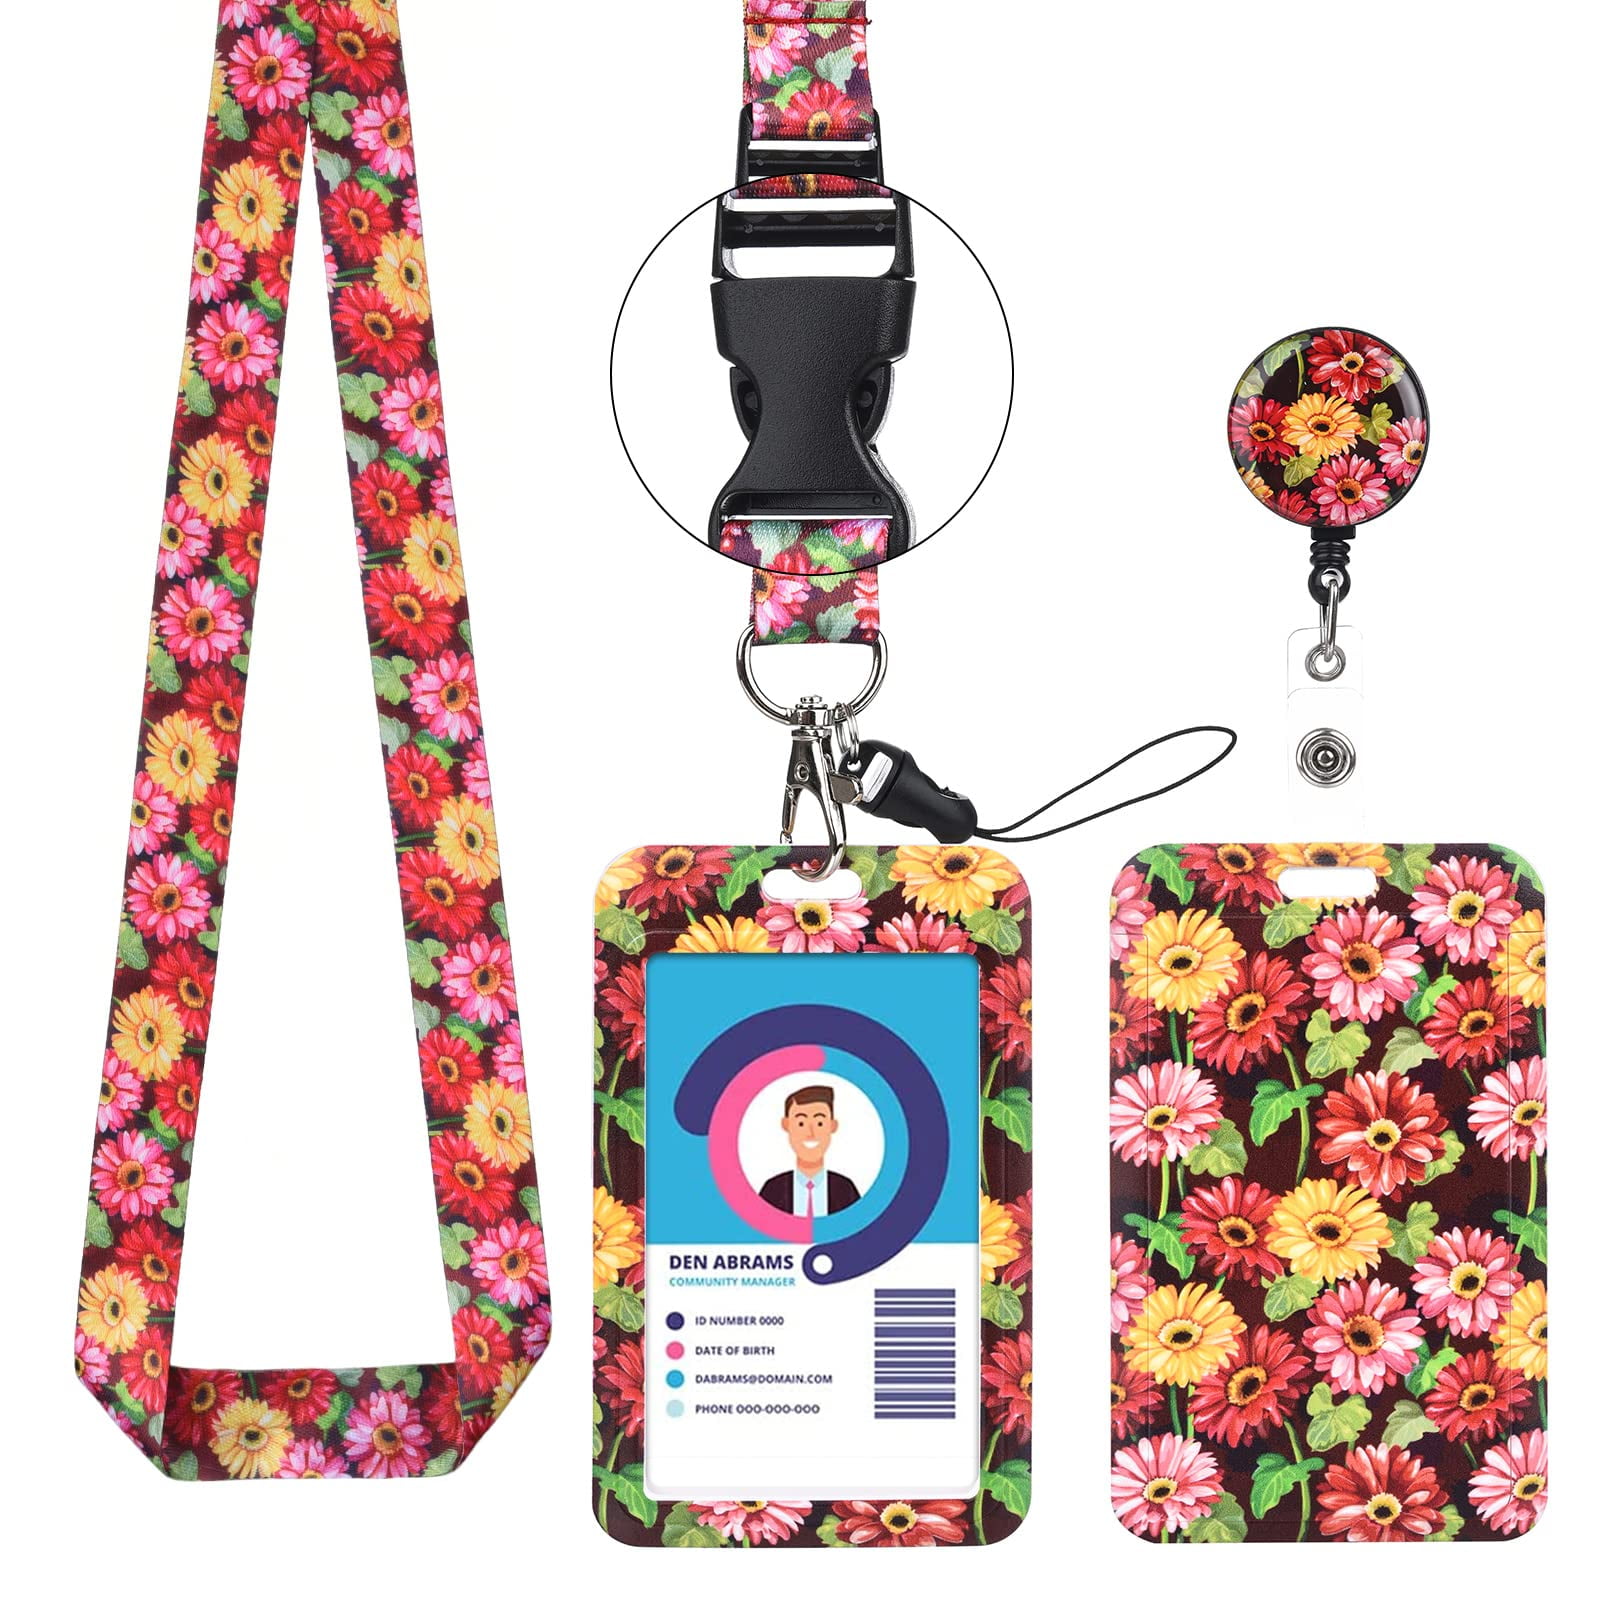 Teacher Lanyards for Id Badges Card and Keys-Fashionable ID Card Holders  with Retractable Lanyards-Soft Fiber,Wallet-Cute Neck Lanyard for  Women,Teens,Nurse,Teacher,Coach(Floral Pattern 2) 